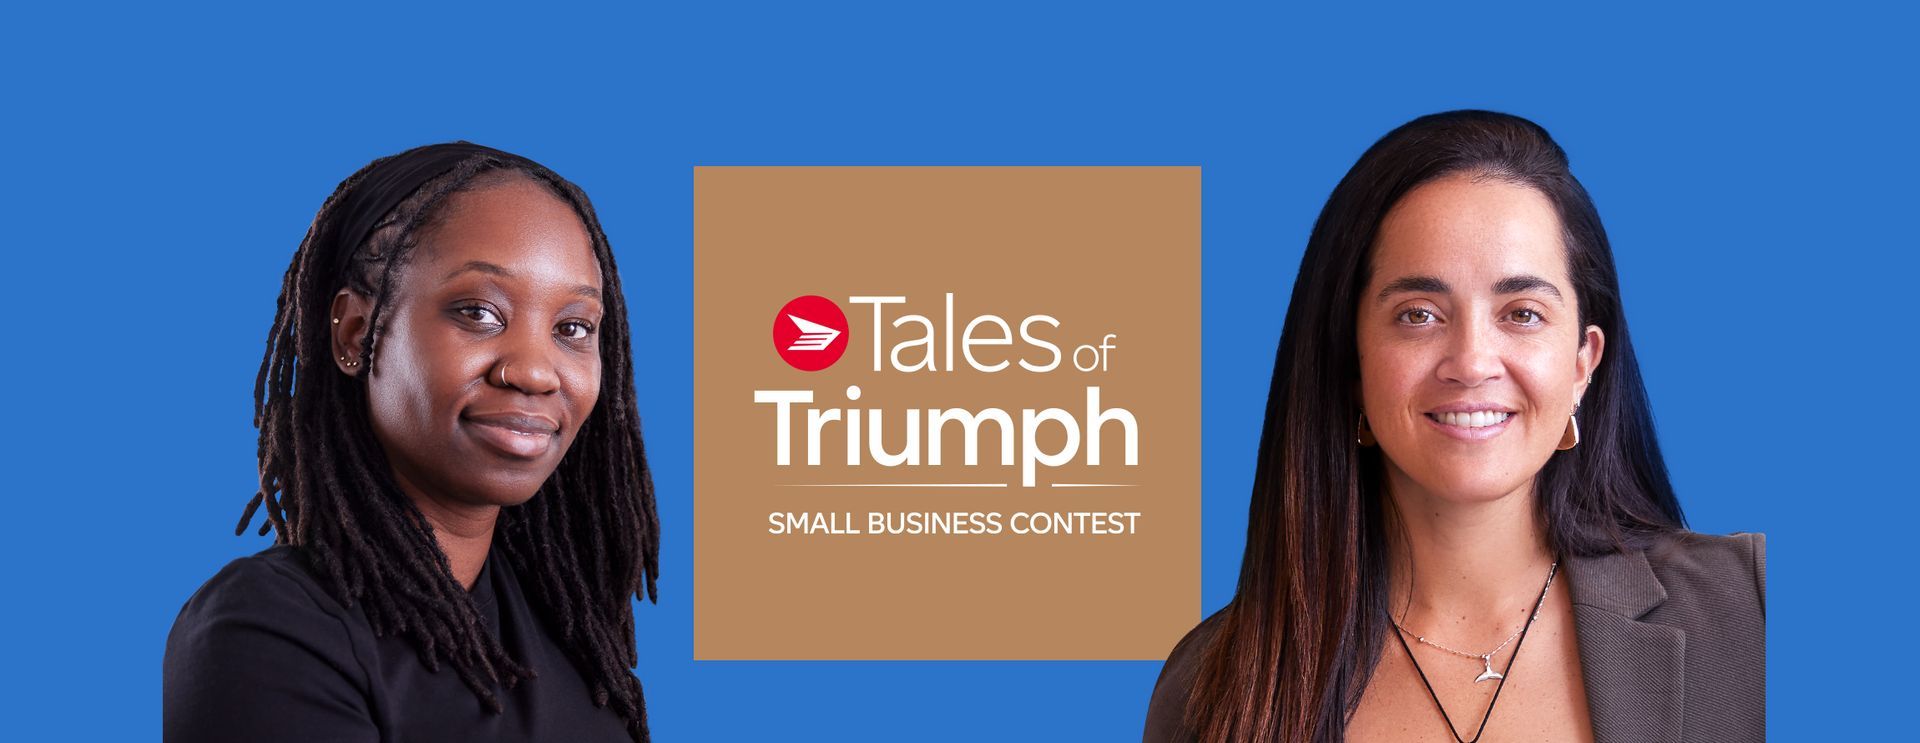 Tales of Triumph Small Business Contest